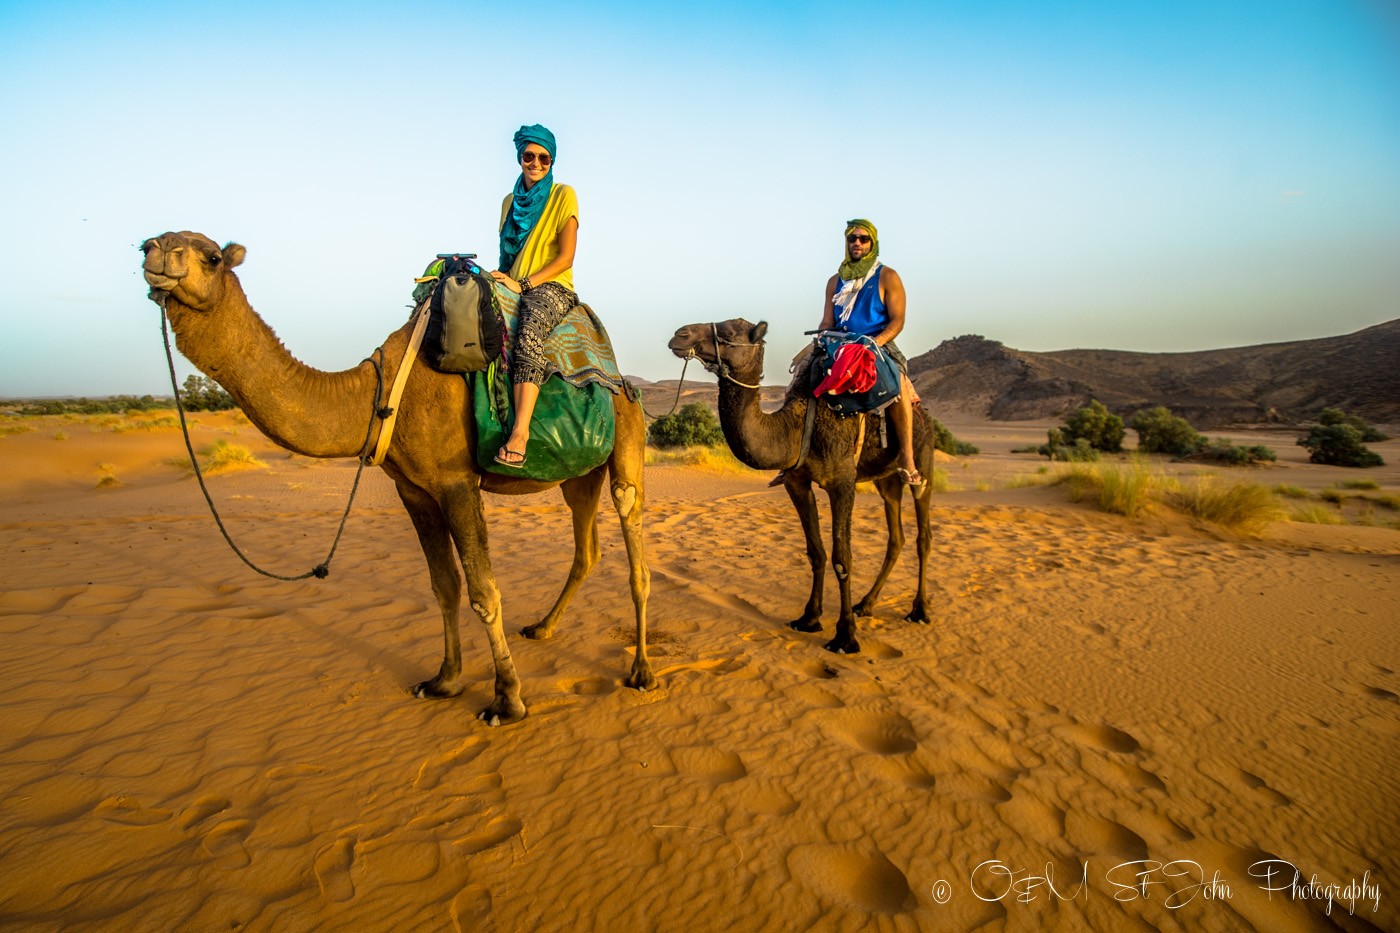 Max and Oksana and our camels in the Sahara Desert, Erg Chebbi. Morocco